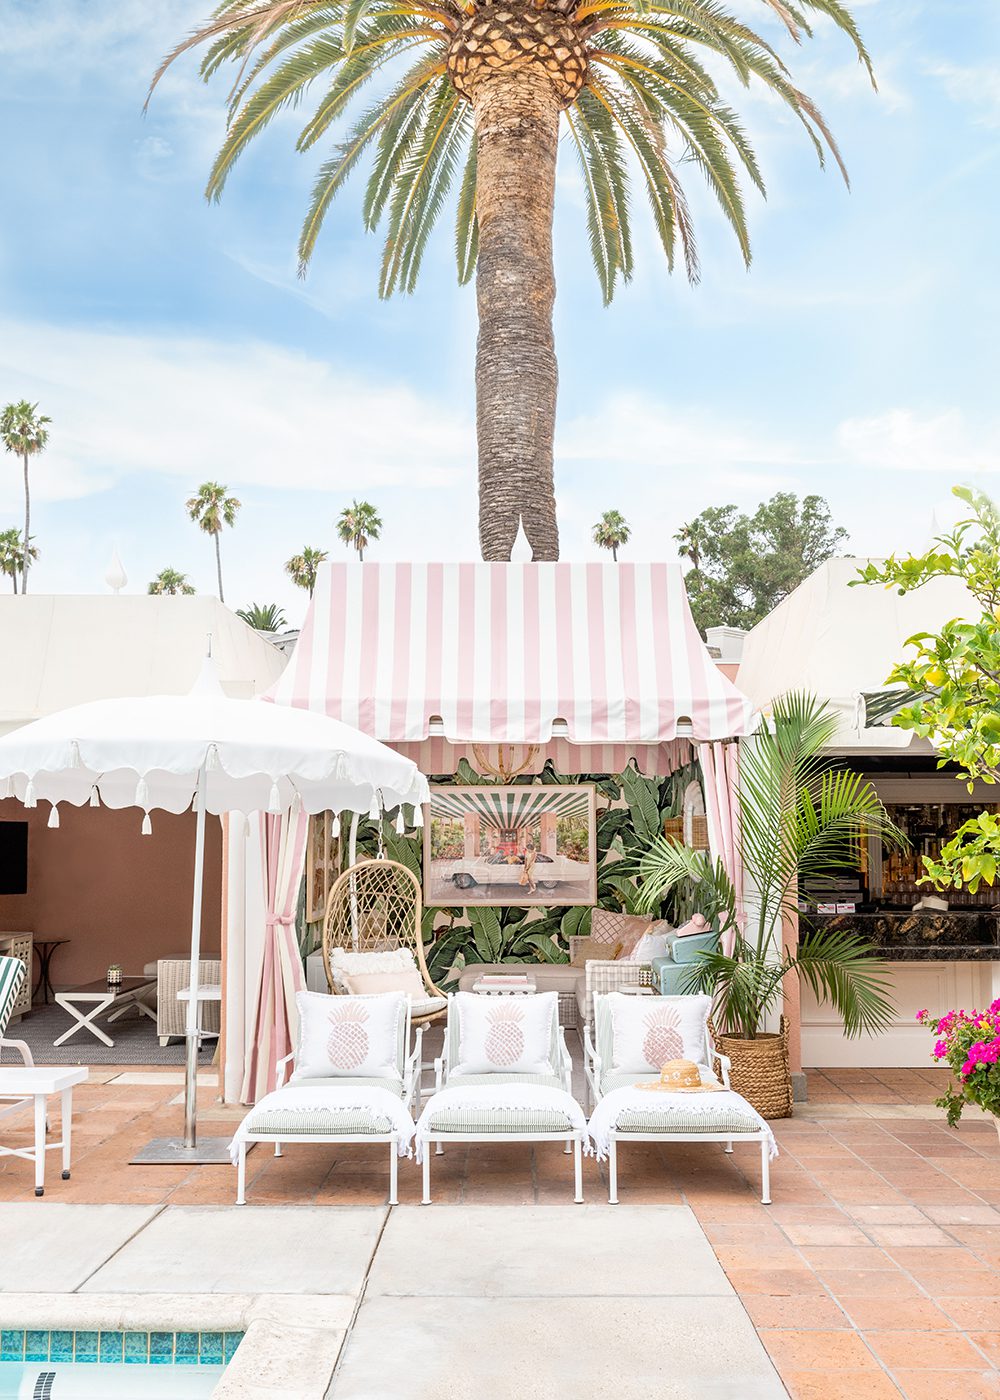 Gray Malin redesigned The Beverly Hills Hotel’s Cabana One, Photo Credit - Dorchester Collection